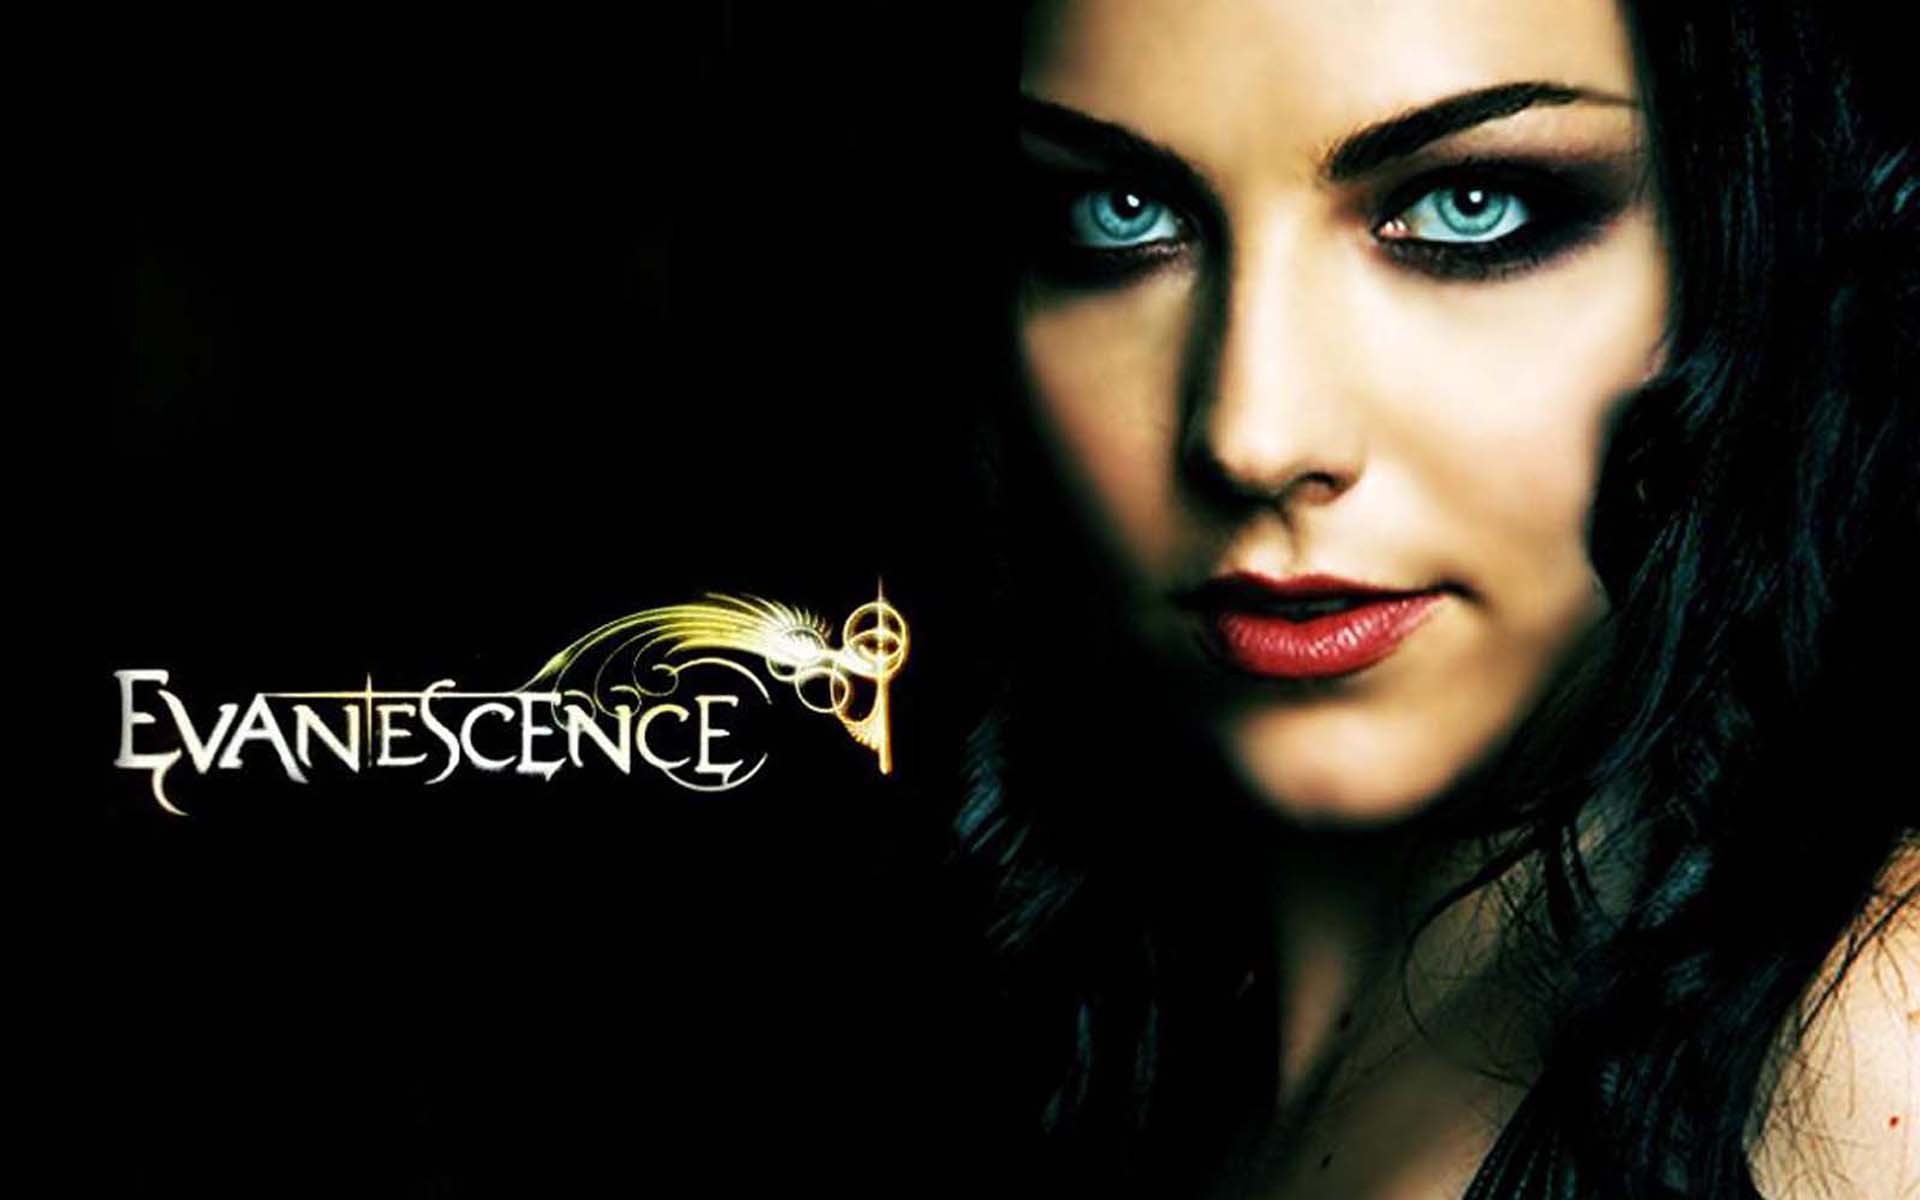 Evanescence Wallpaper 1920x1200 Wallpapers 1920x1200 Wallpapers